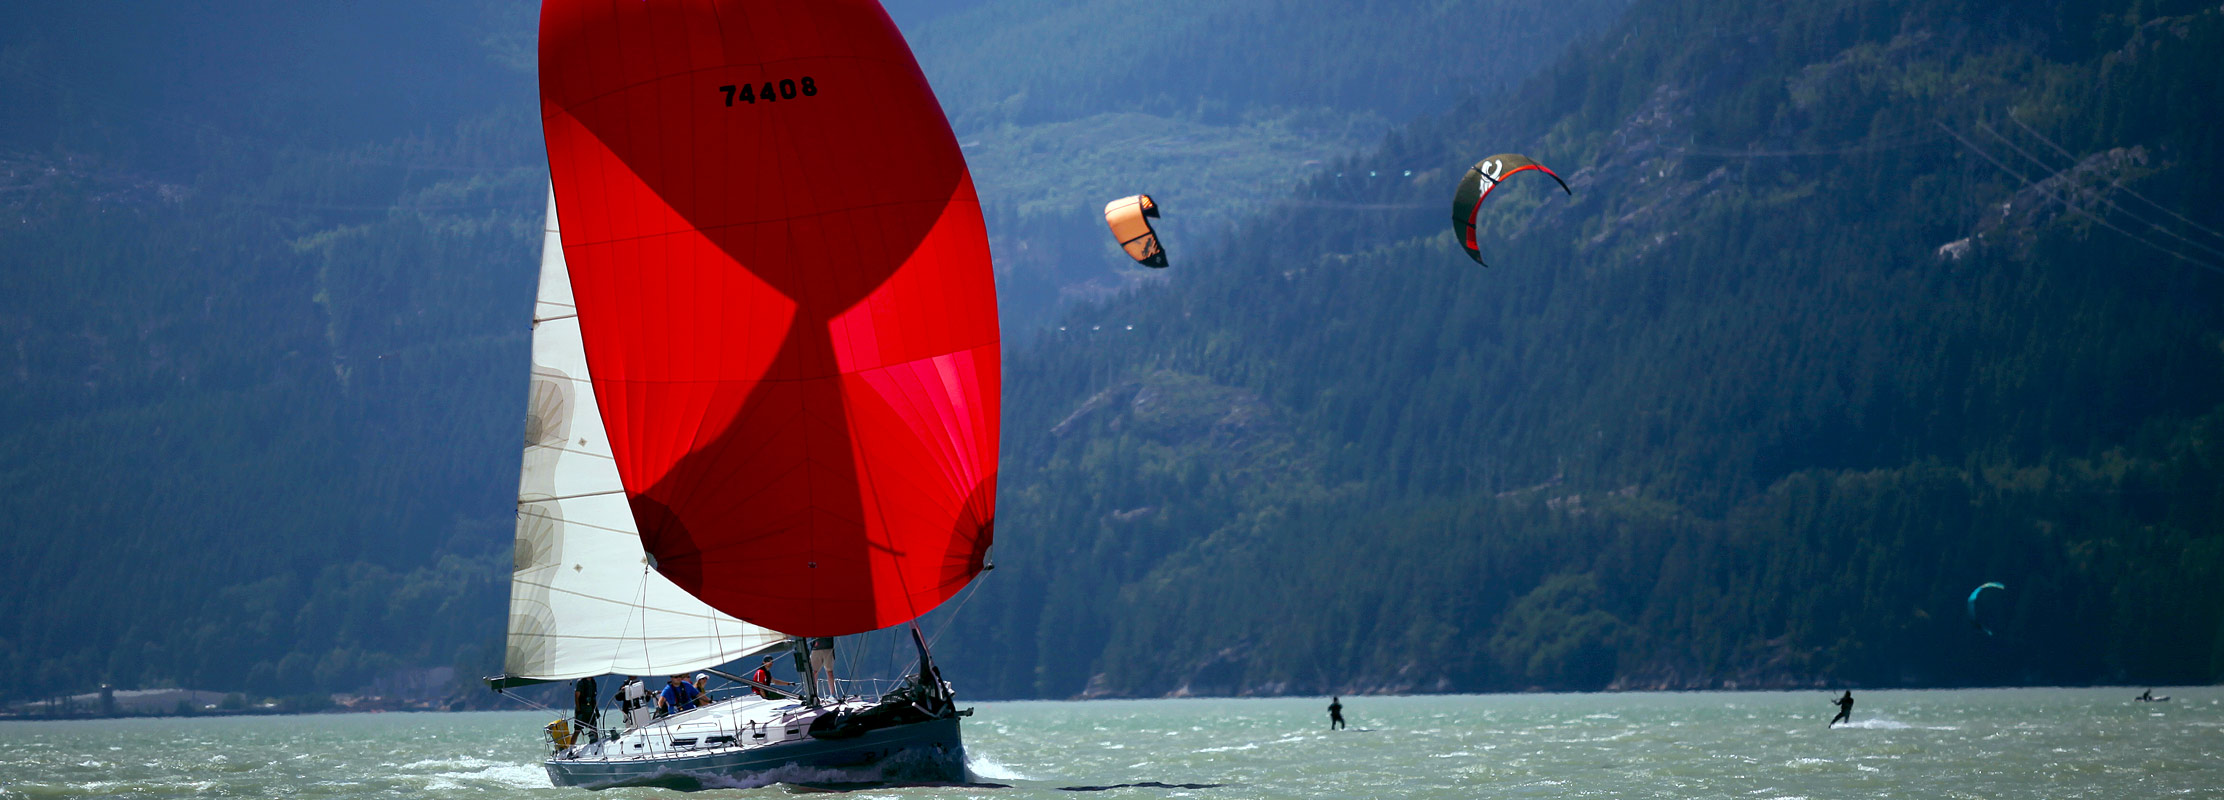 Sailing in Squamish BC with Kiteboarders 